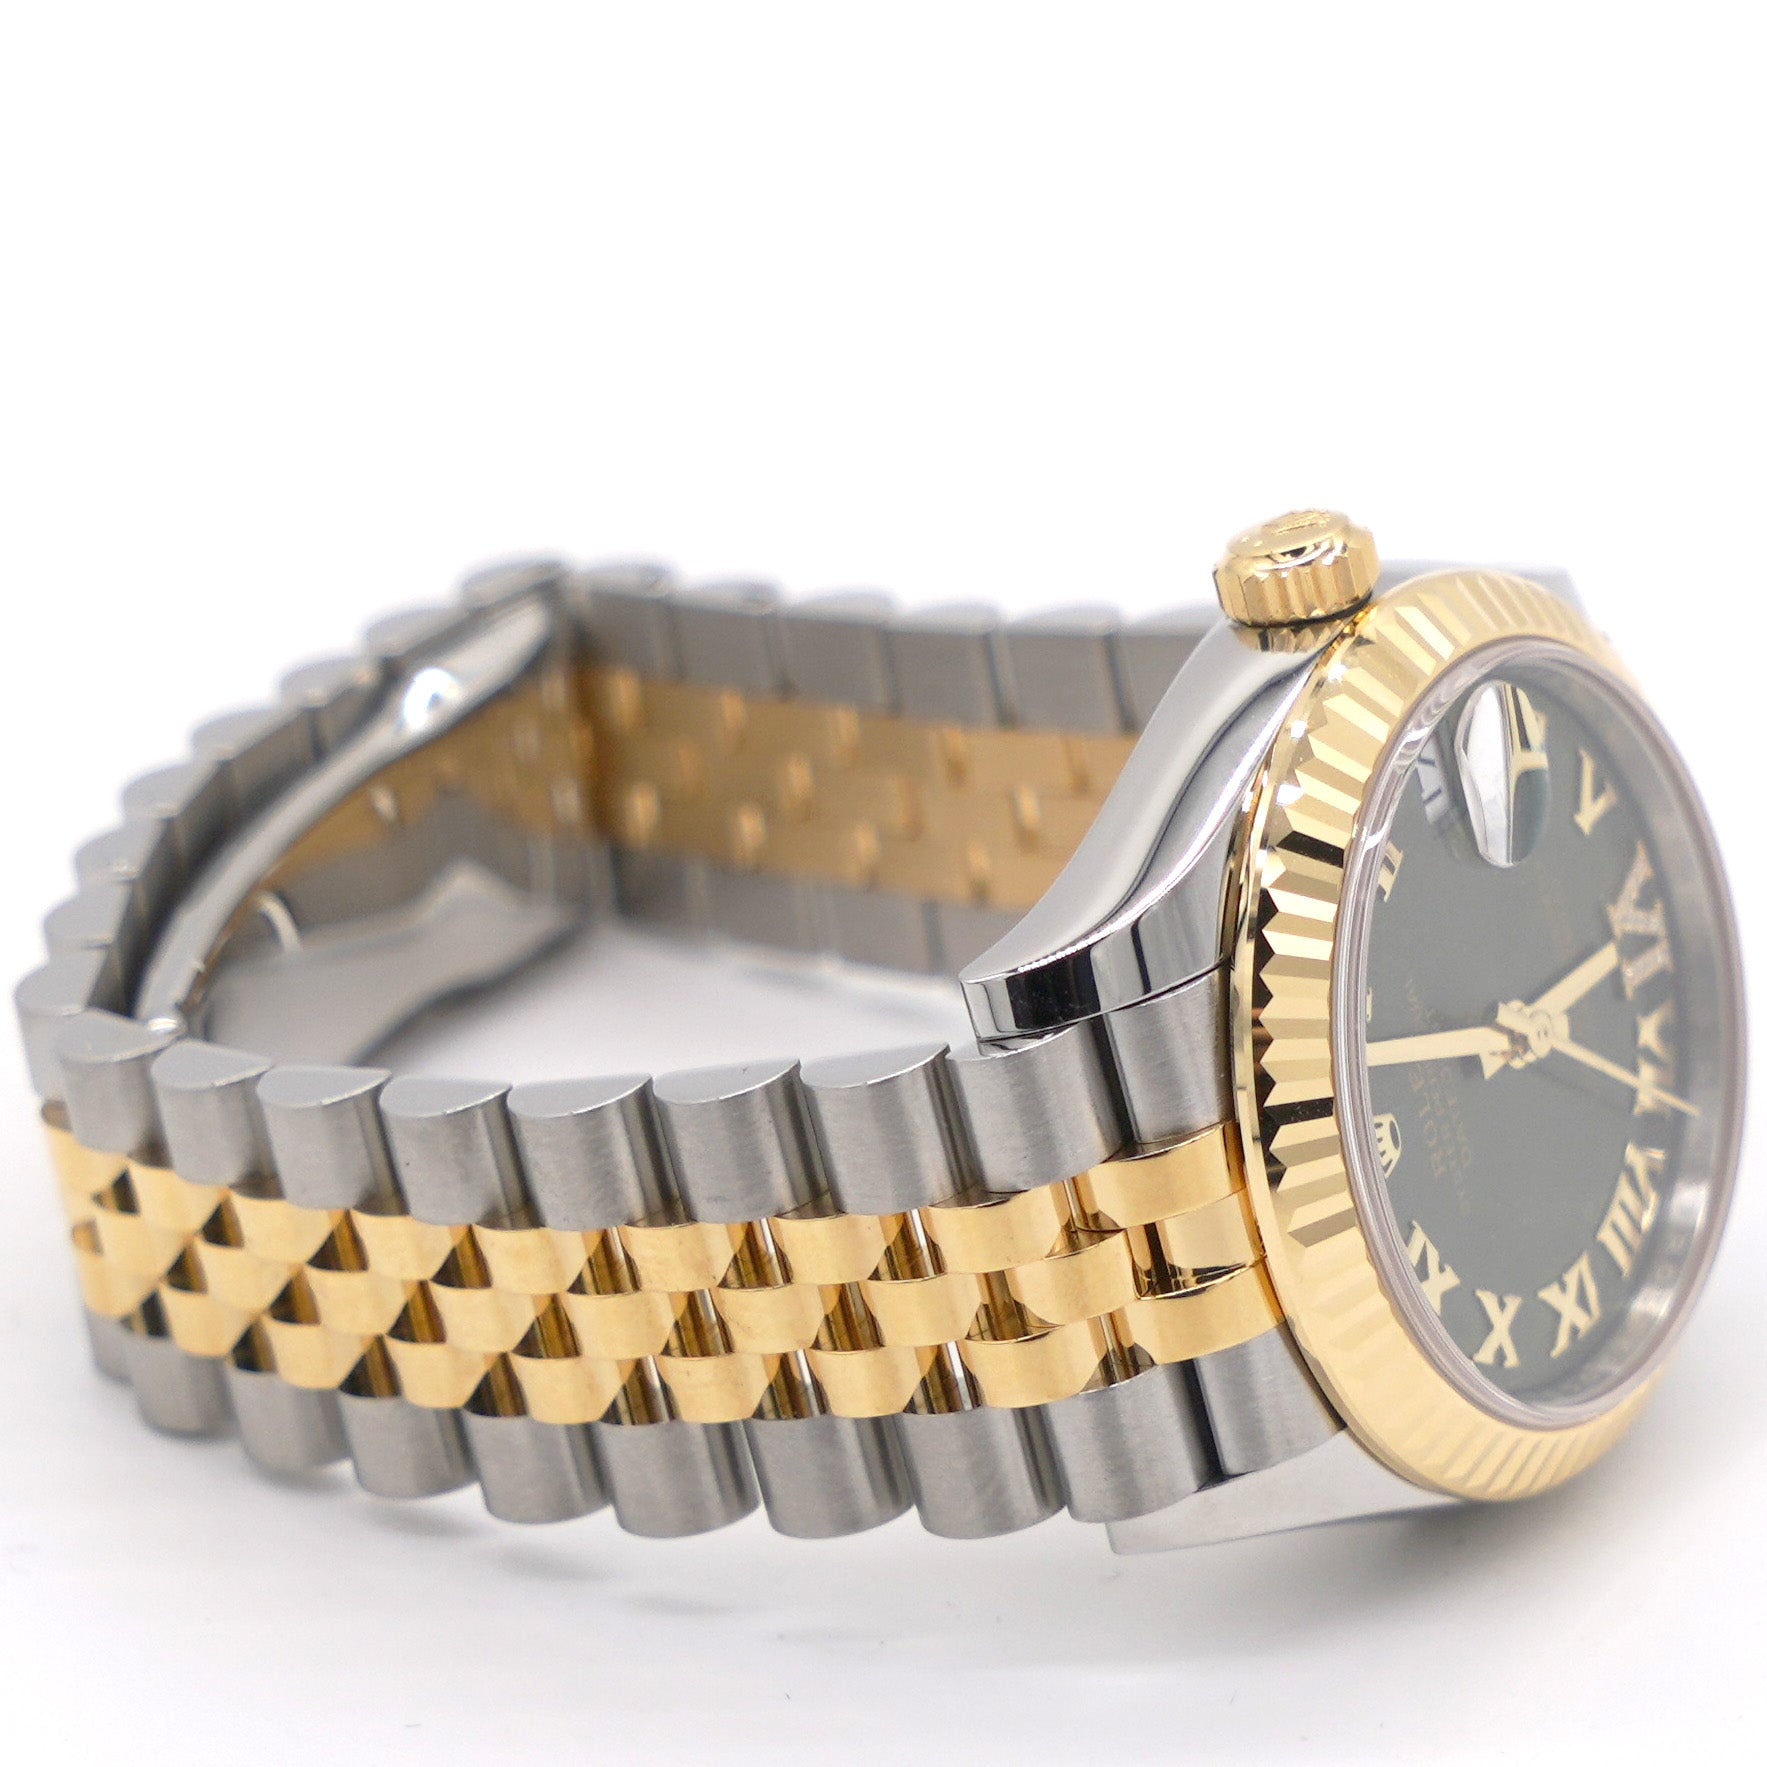 Datejust 31 Oystersteel Yellow Gold